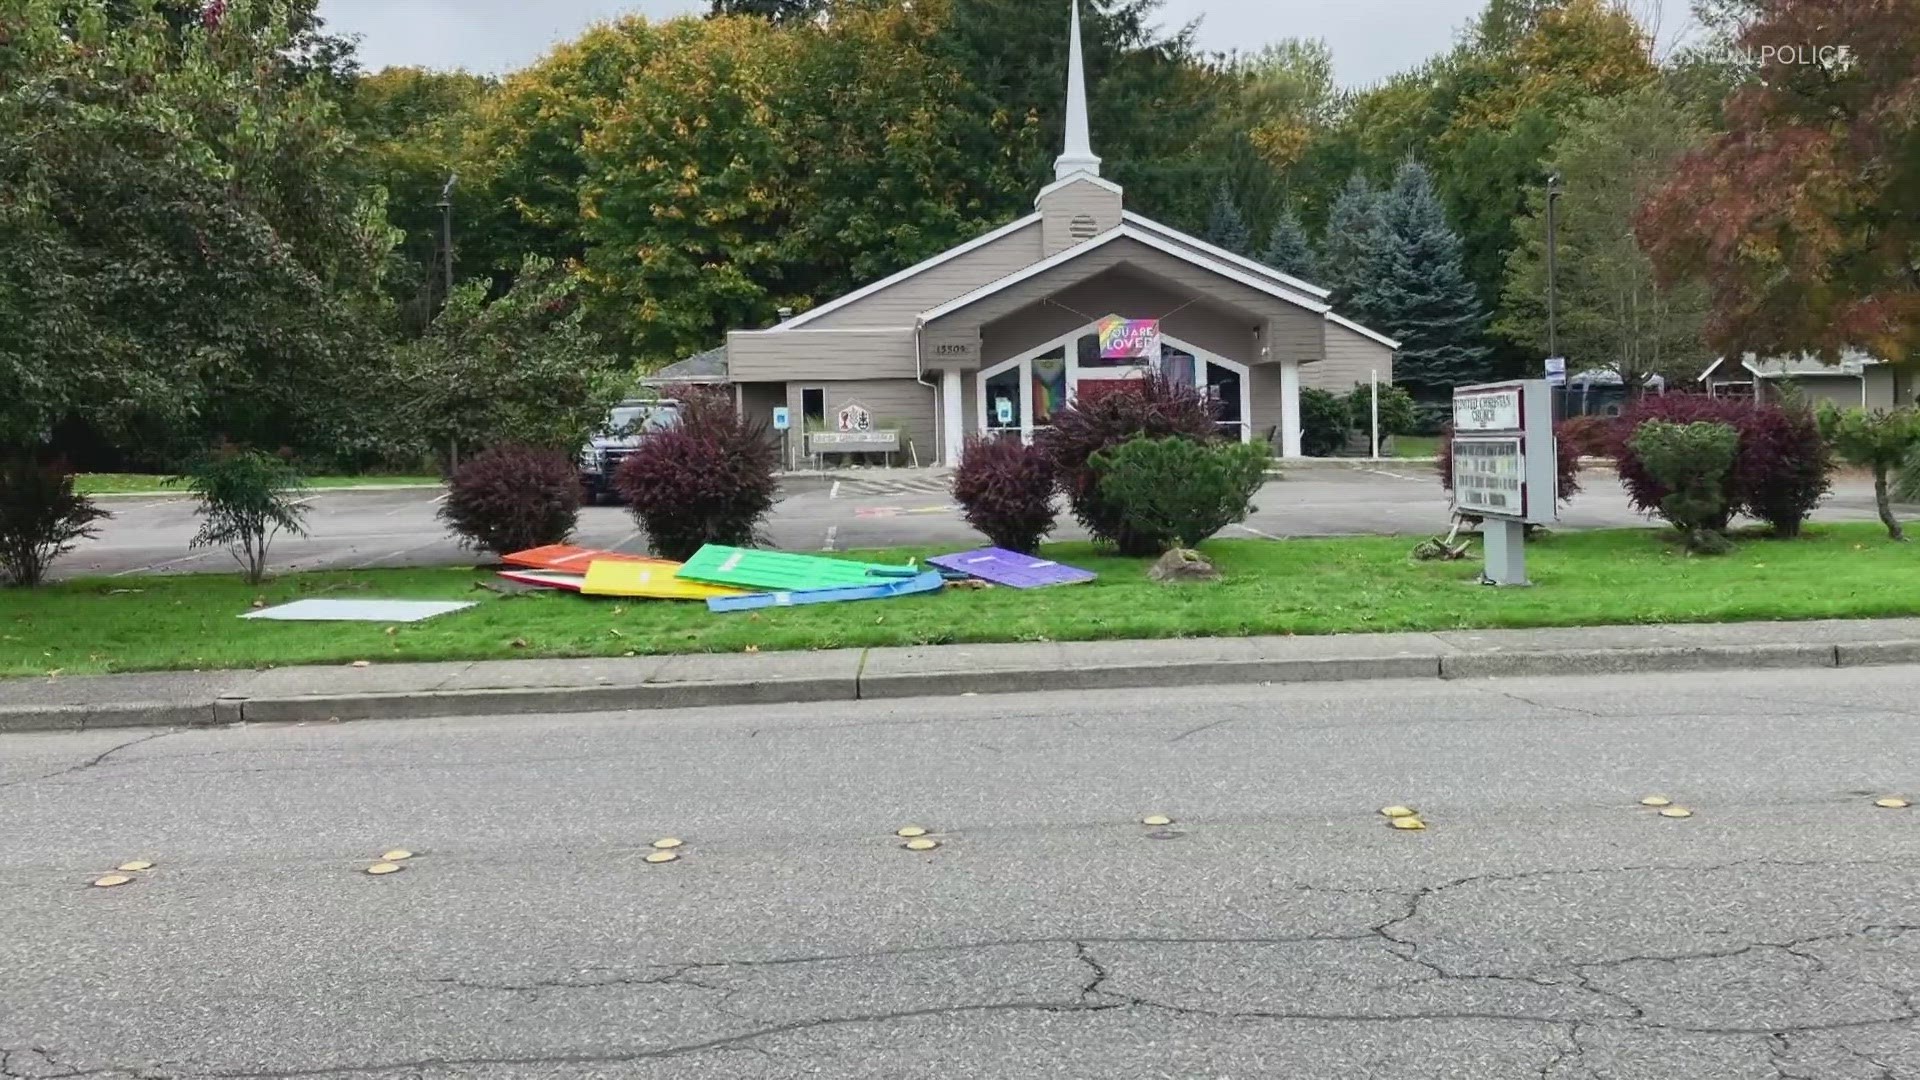 Renton police believe someone drove through a display of rainbow doors reading “God’s doors are open to all” at United Christian Church. It caused $1,800 of damage.